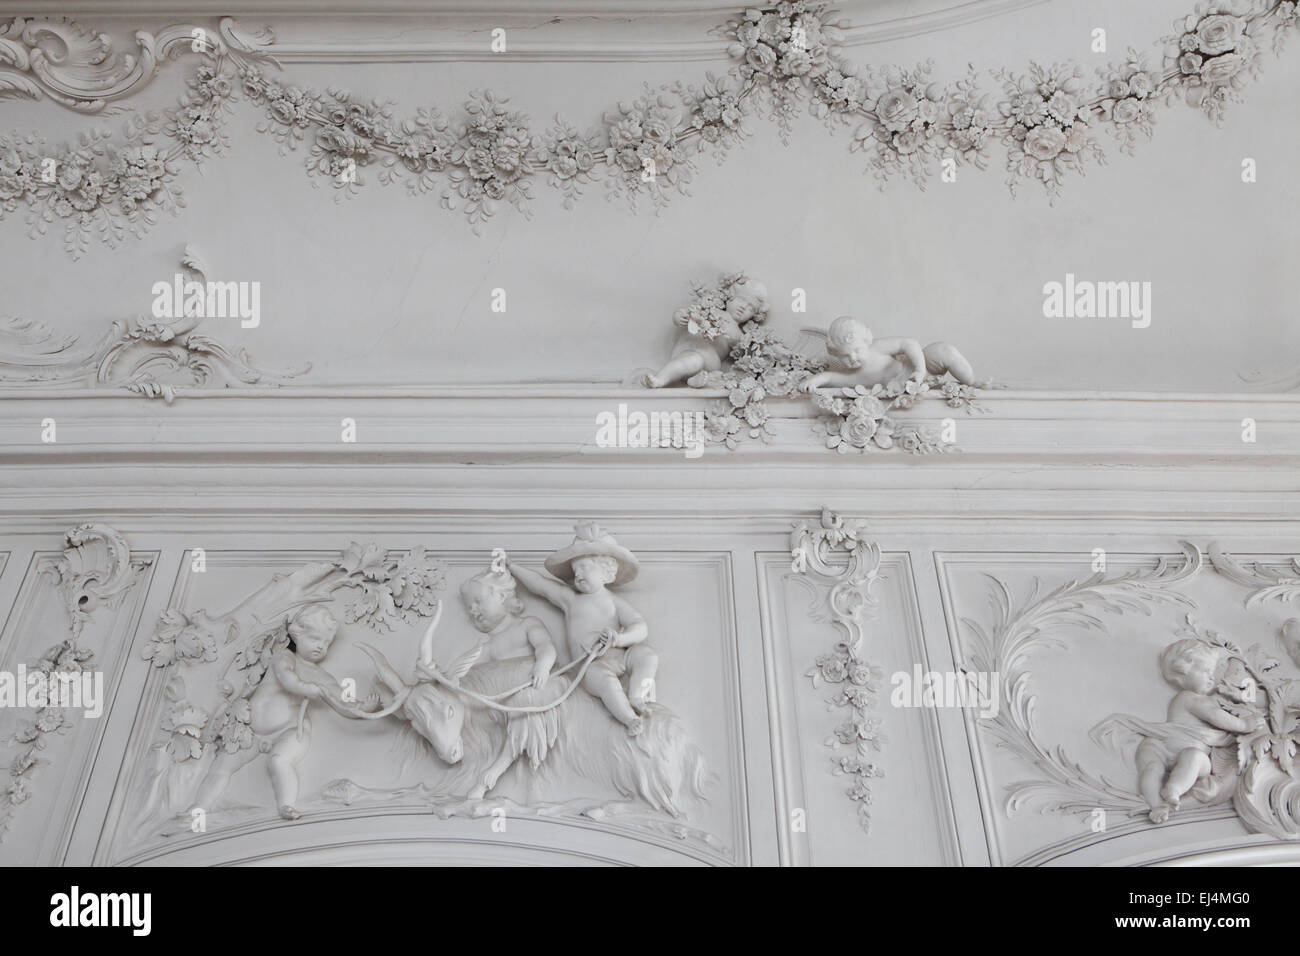 Rococo stucco decoration by German sculptor Johann Michael Graff in the White Hall of the Rundale Palace, Latvia. Stock Photo